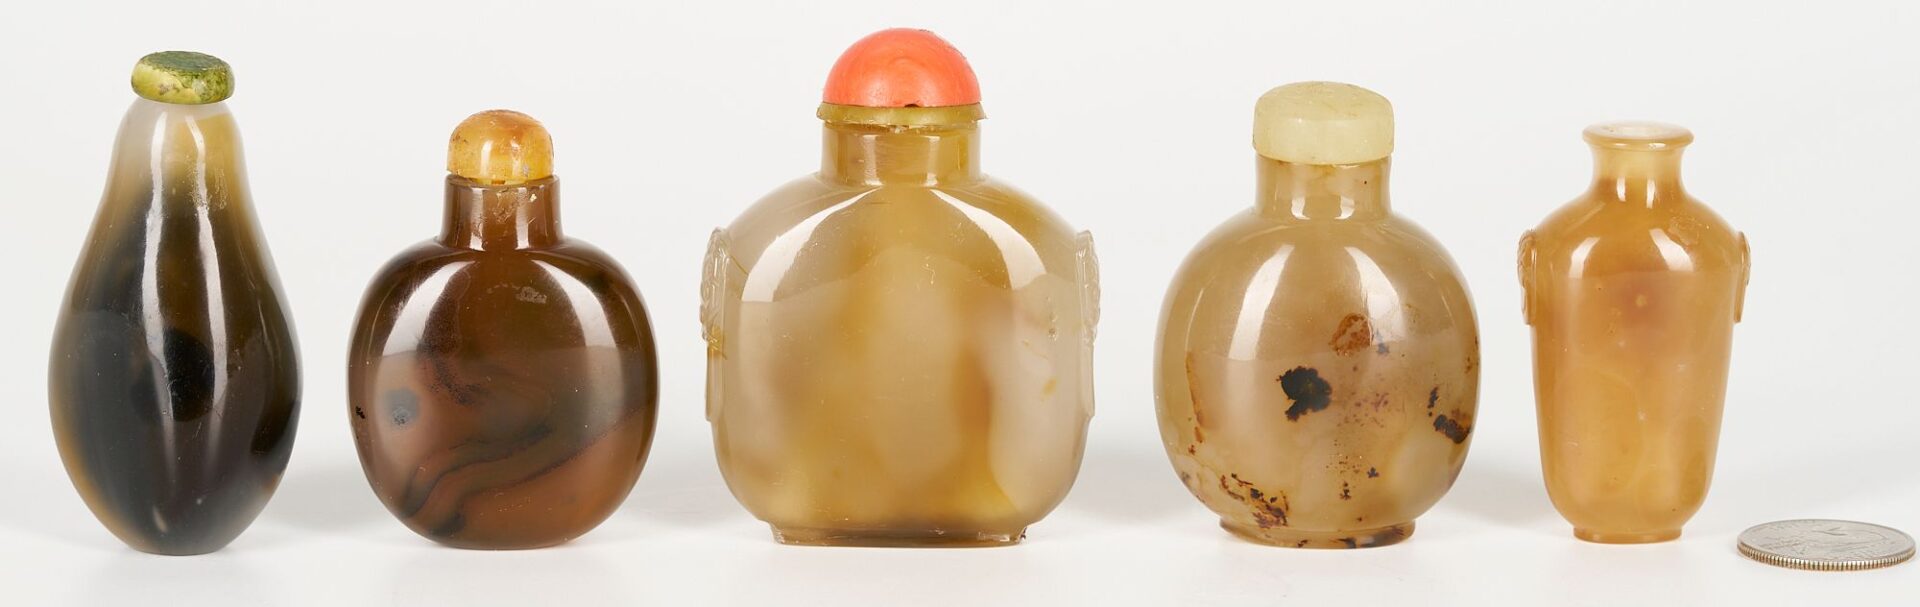 Lot 19: 5 Chinese Carved Agate Snuff Bottles